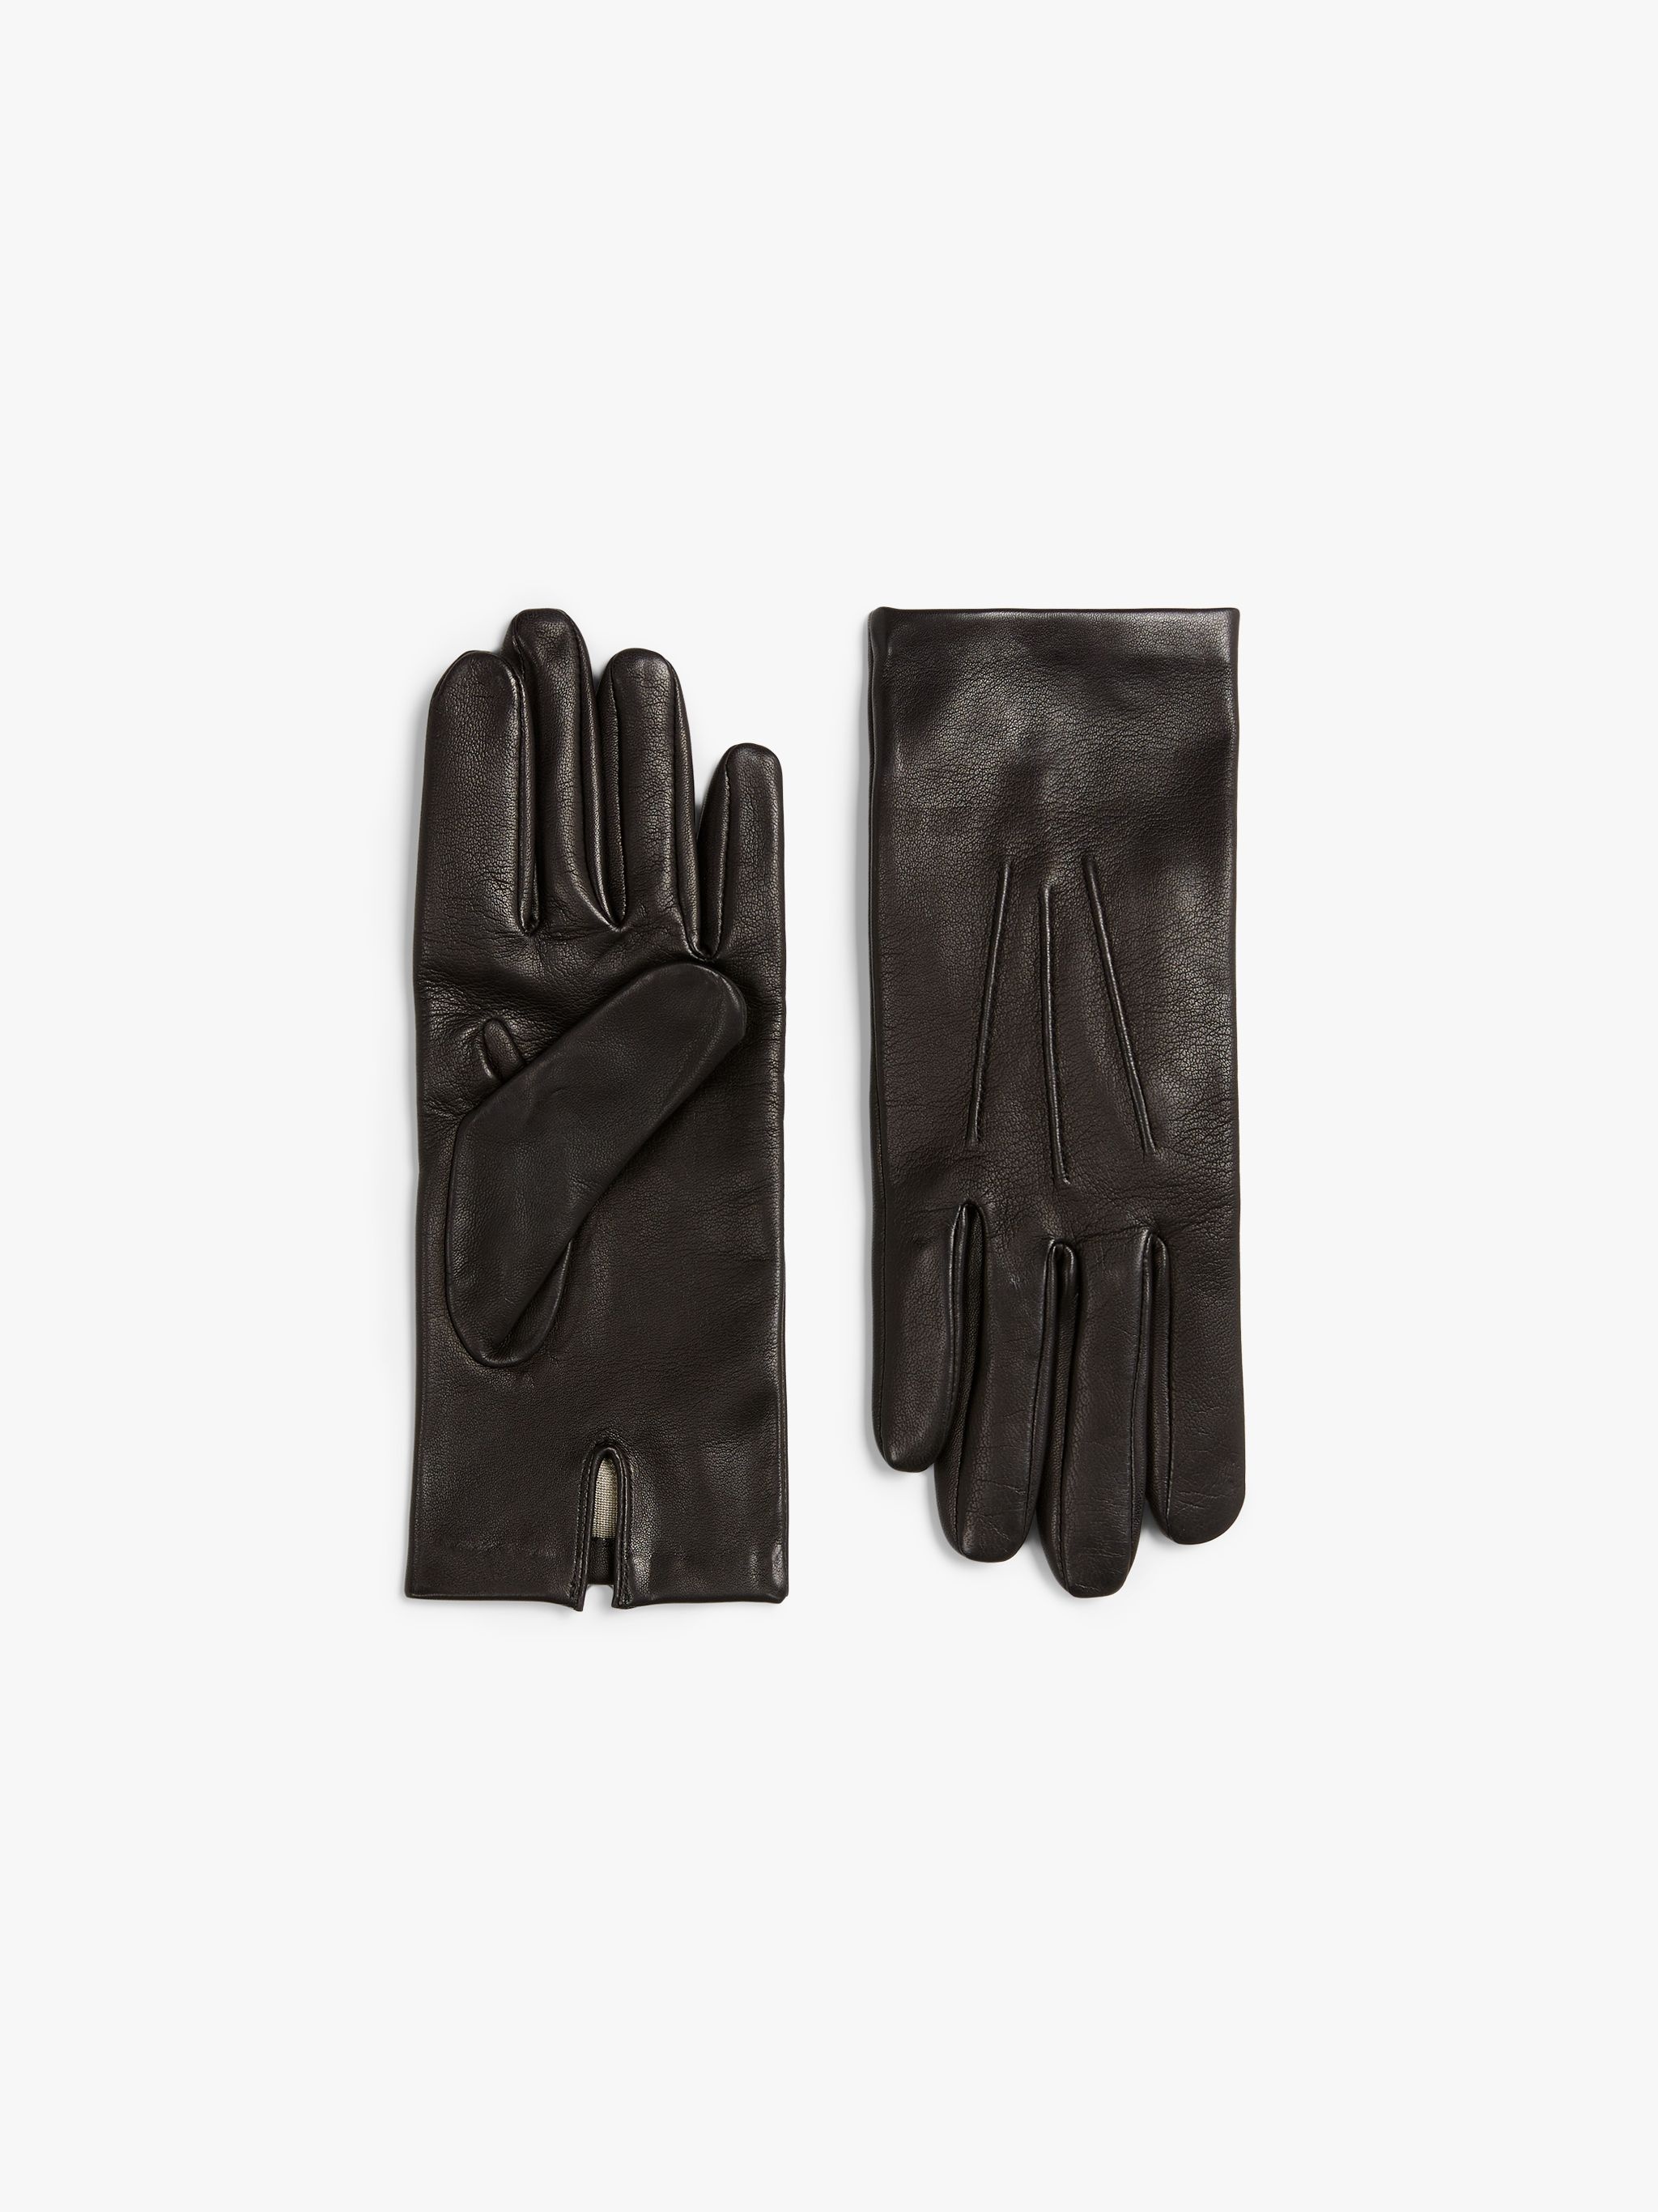 BLACK HAIRSHEEP LEATHER SILK LINED GLOVES - 1